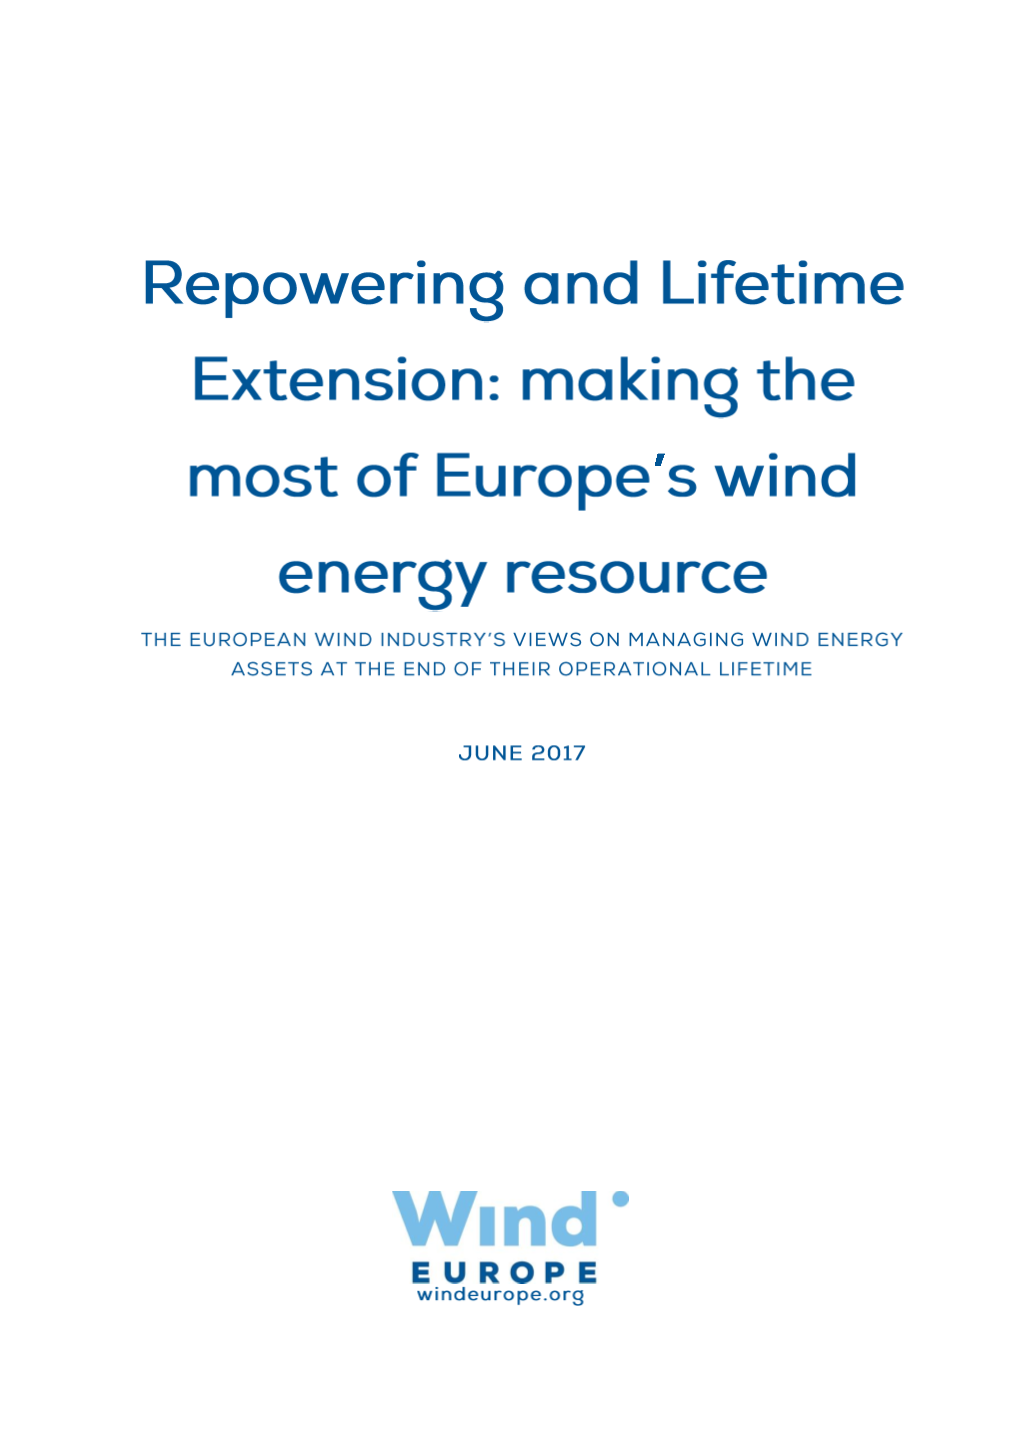 Repowering and Lifetime Extension